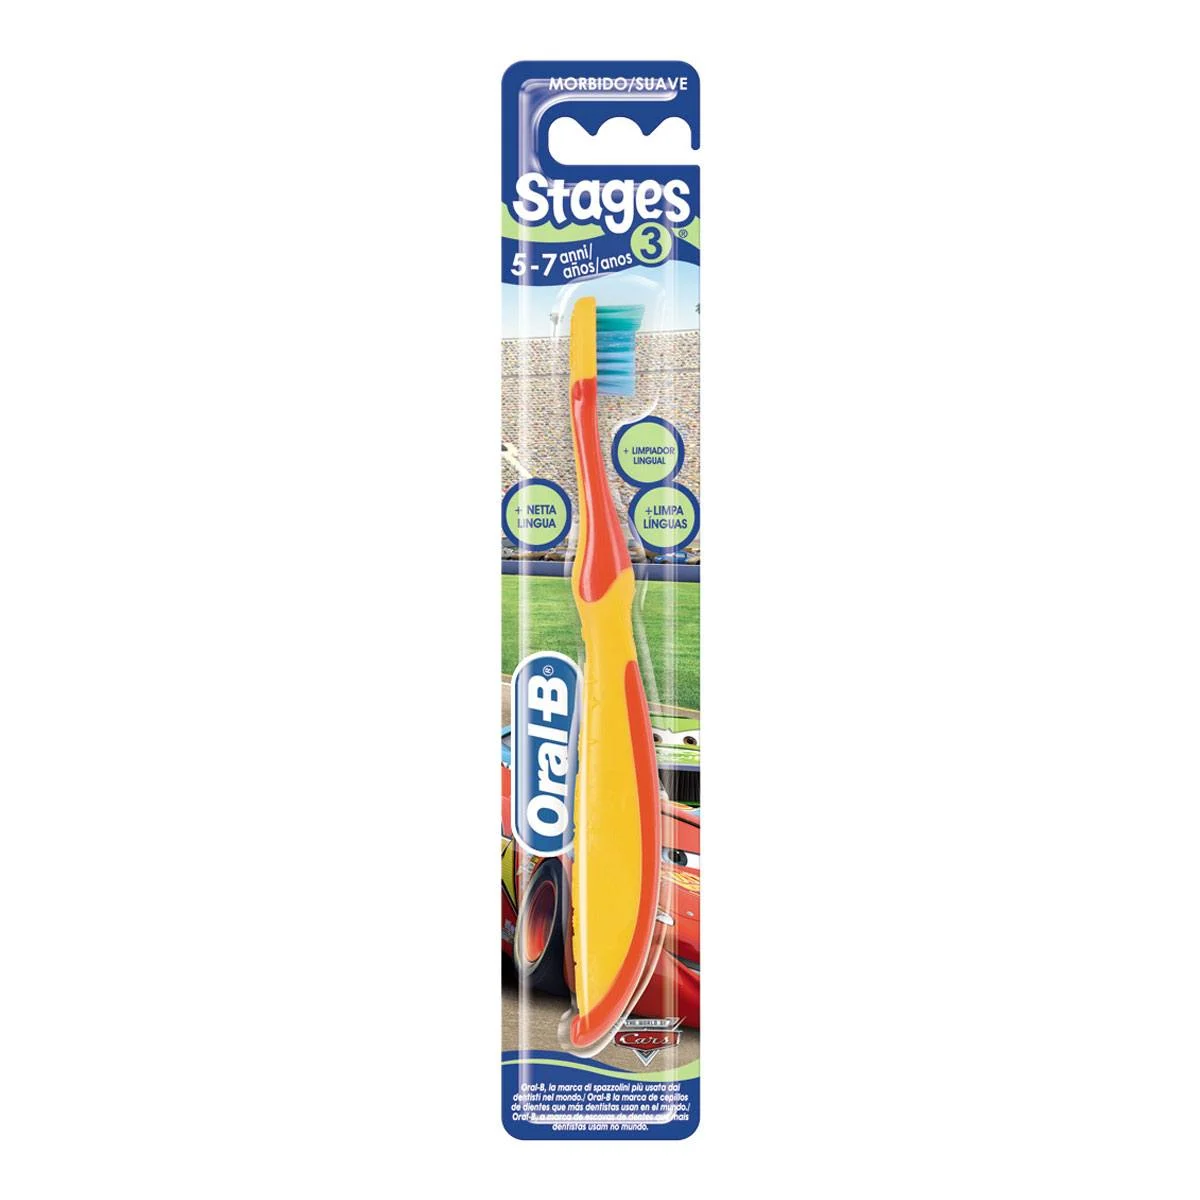 Spazzolino manuale Oral-B Stages 3 